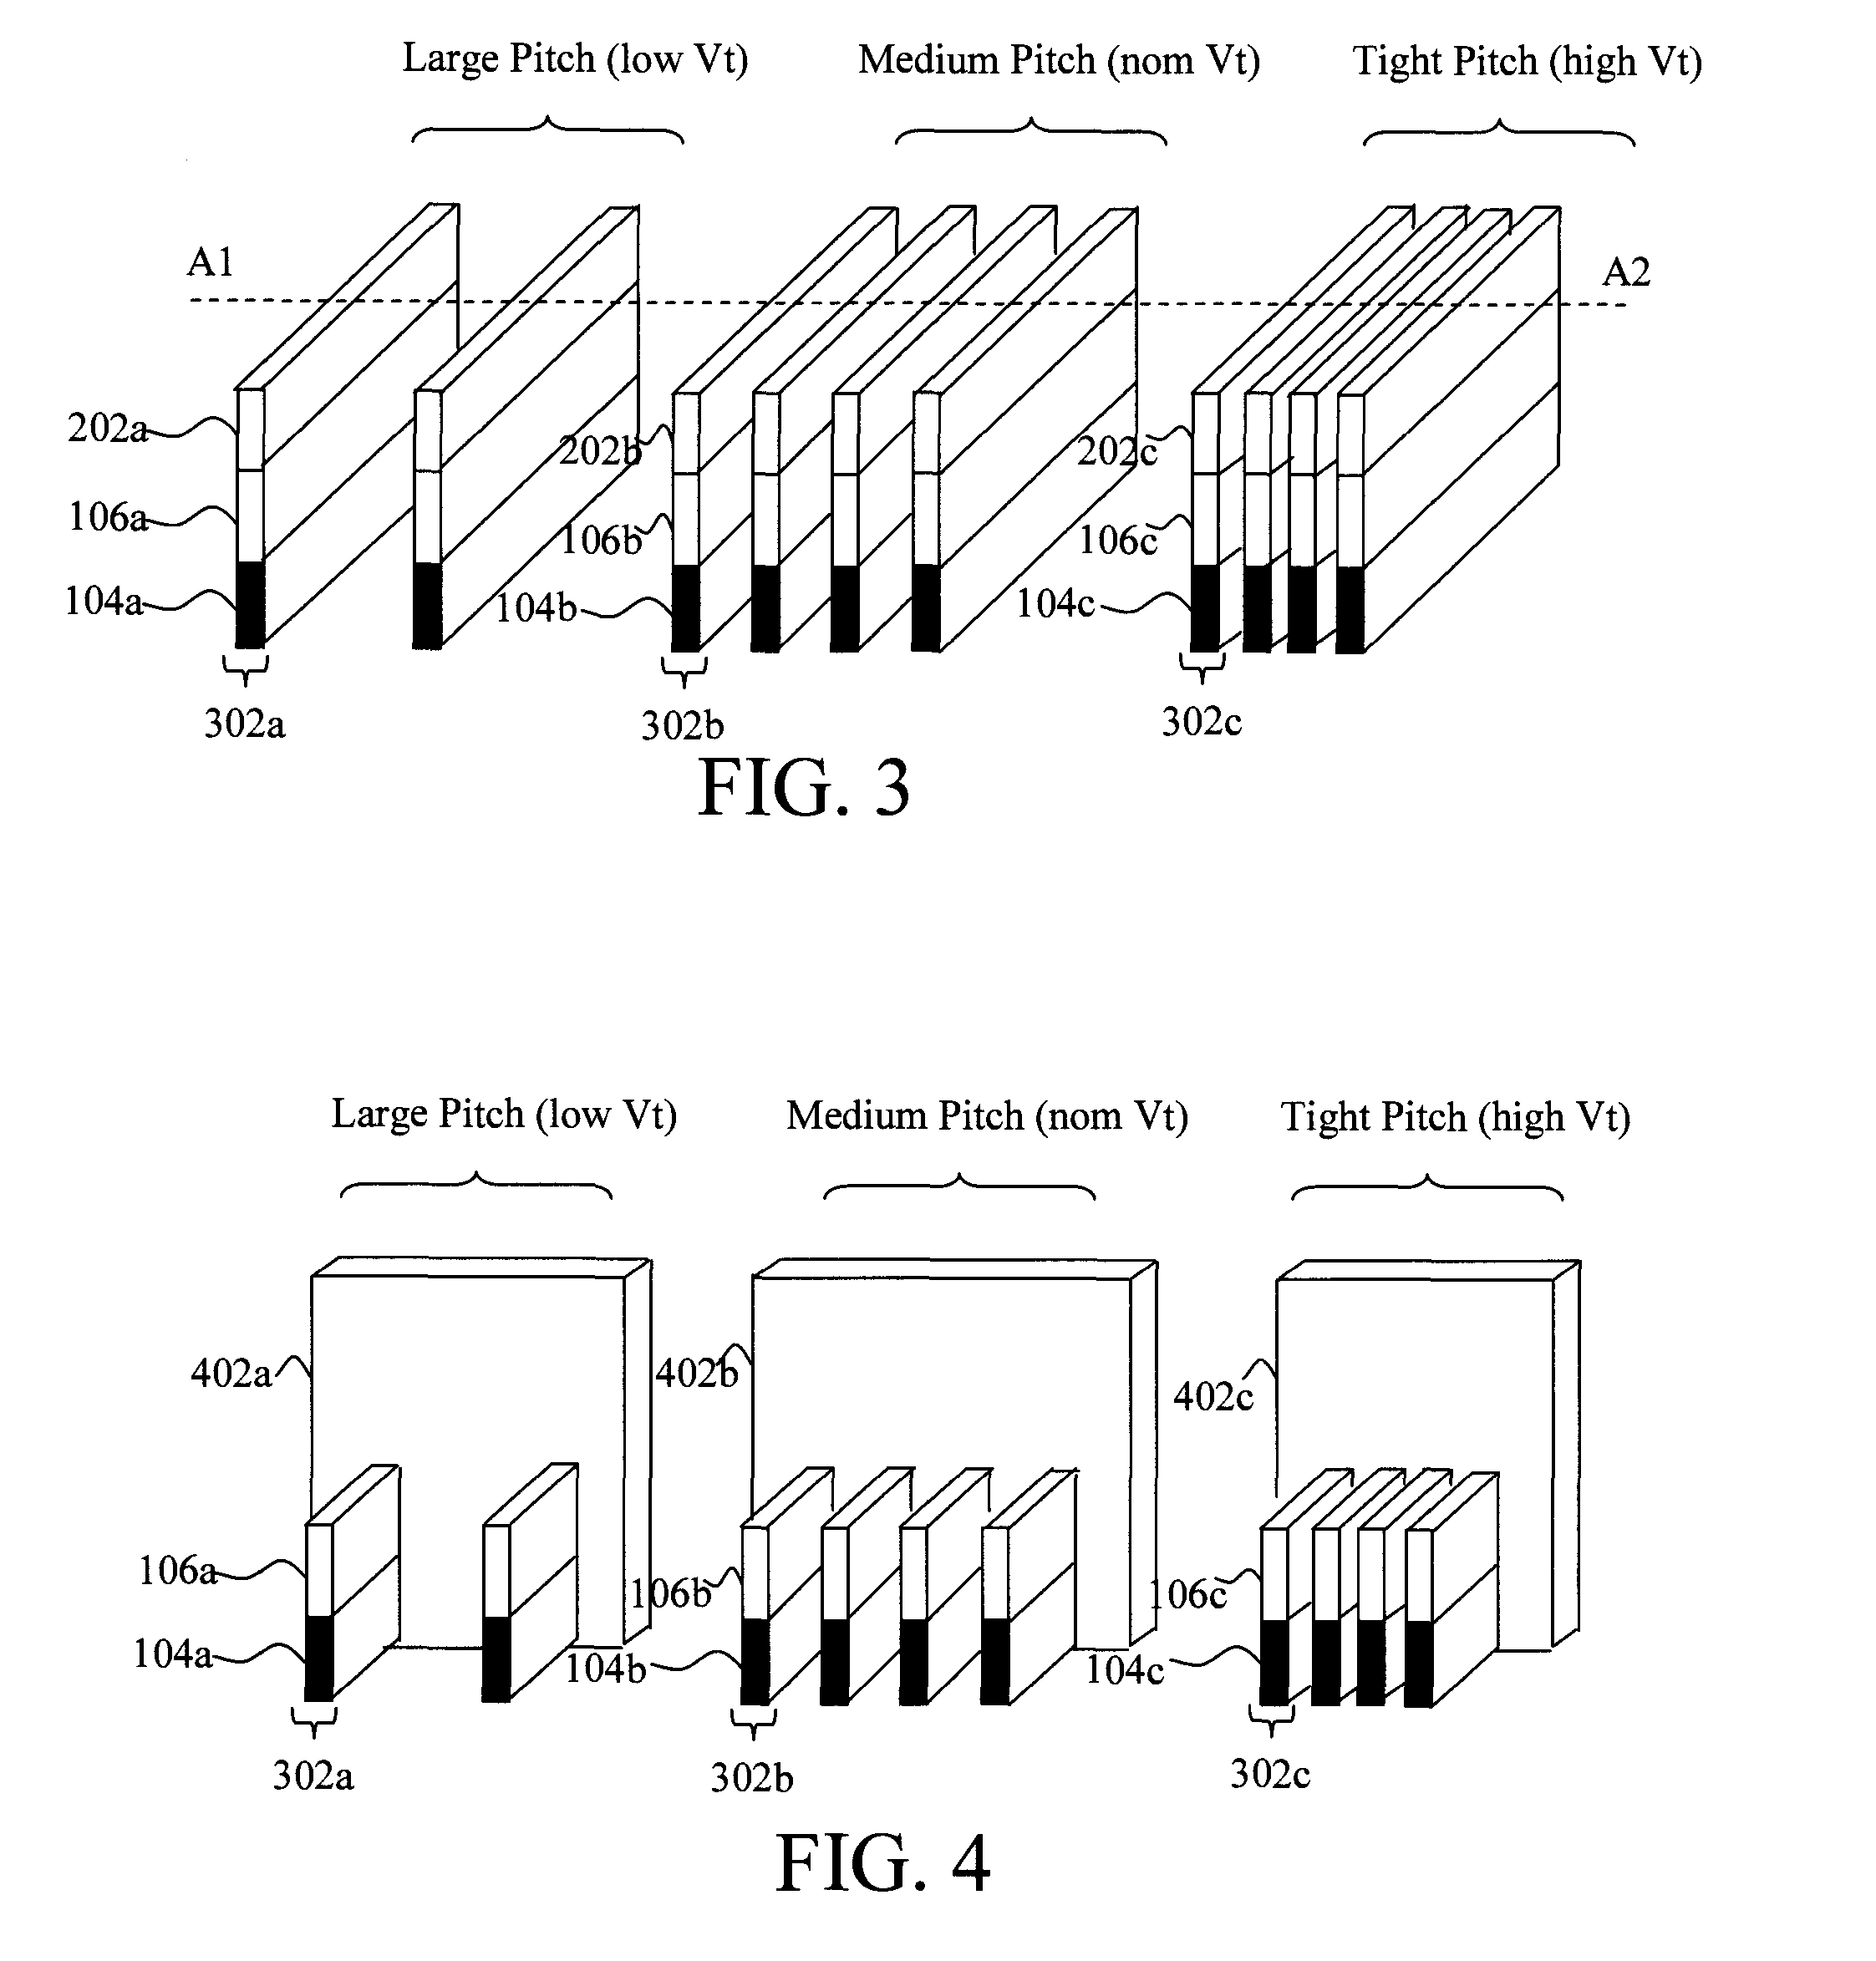 Techniques for metal gate workfunction engineering to enable multiple threshold voltage FINFET devices